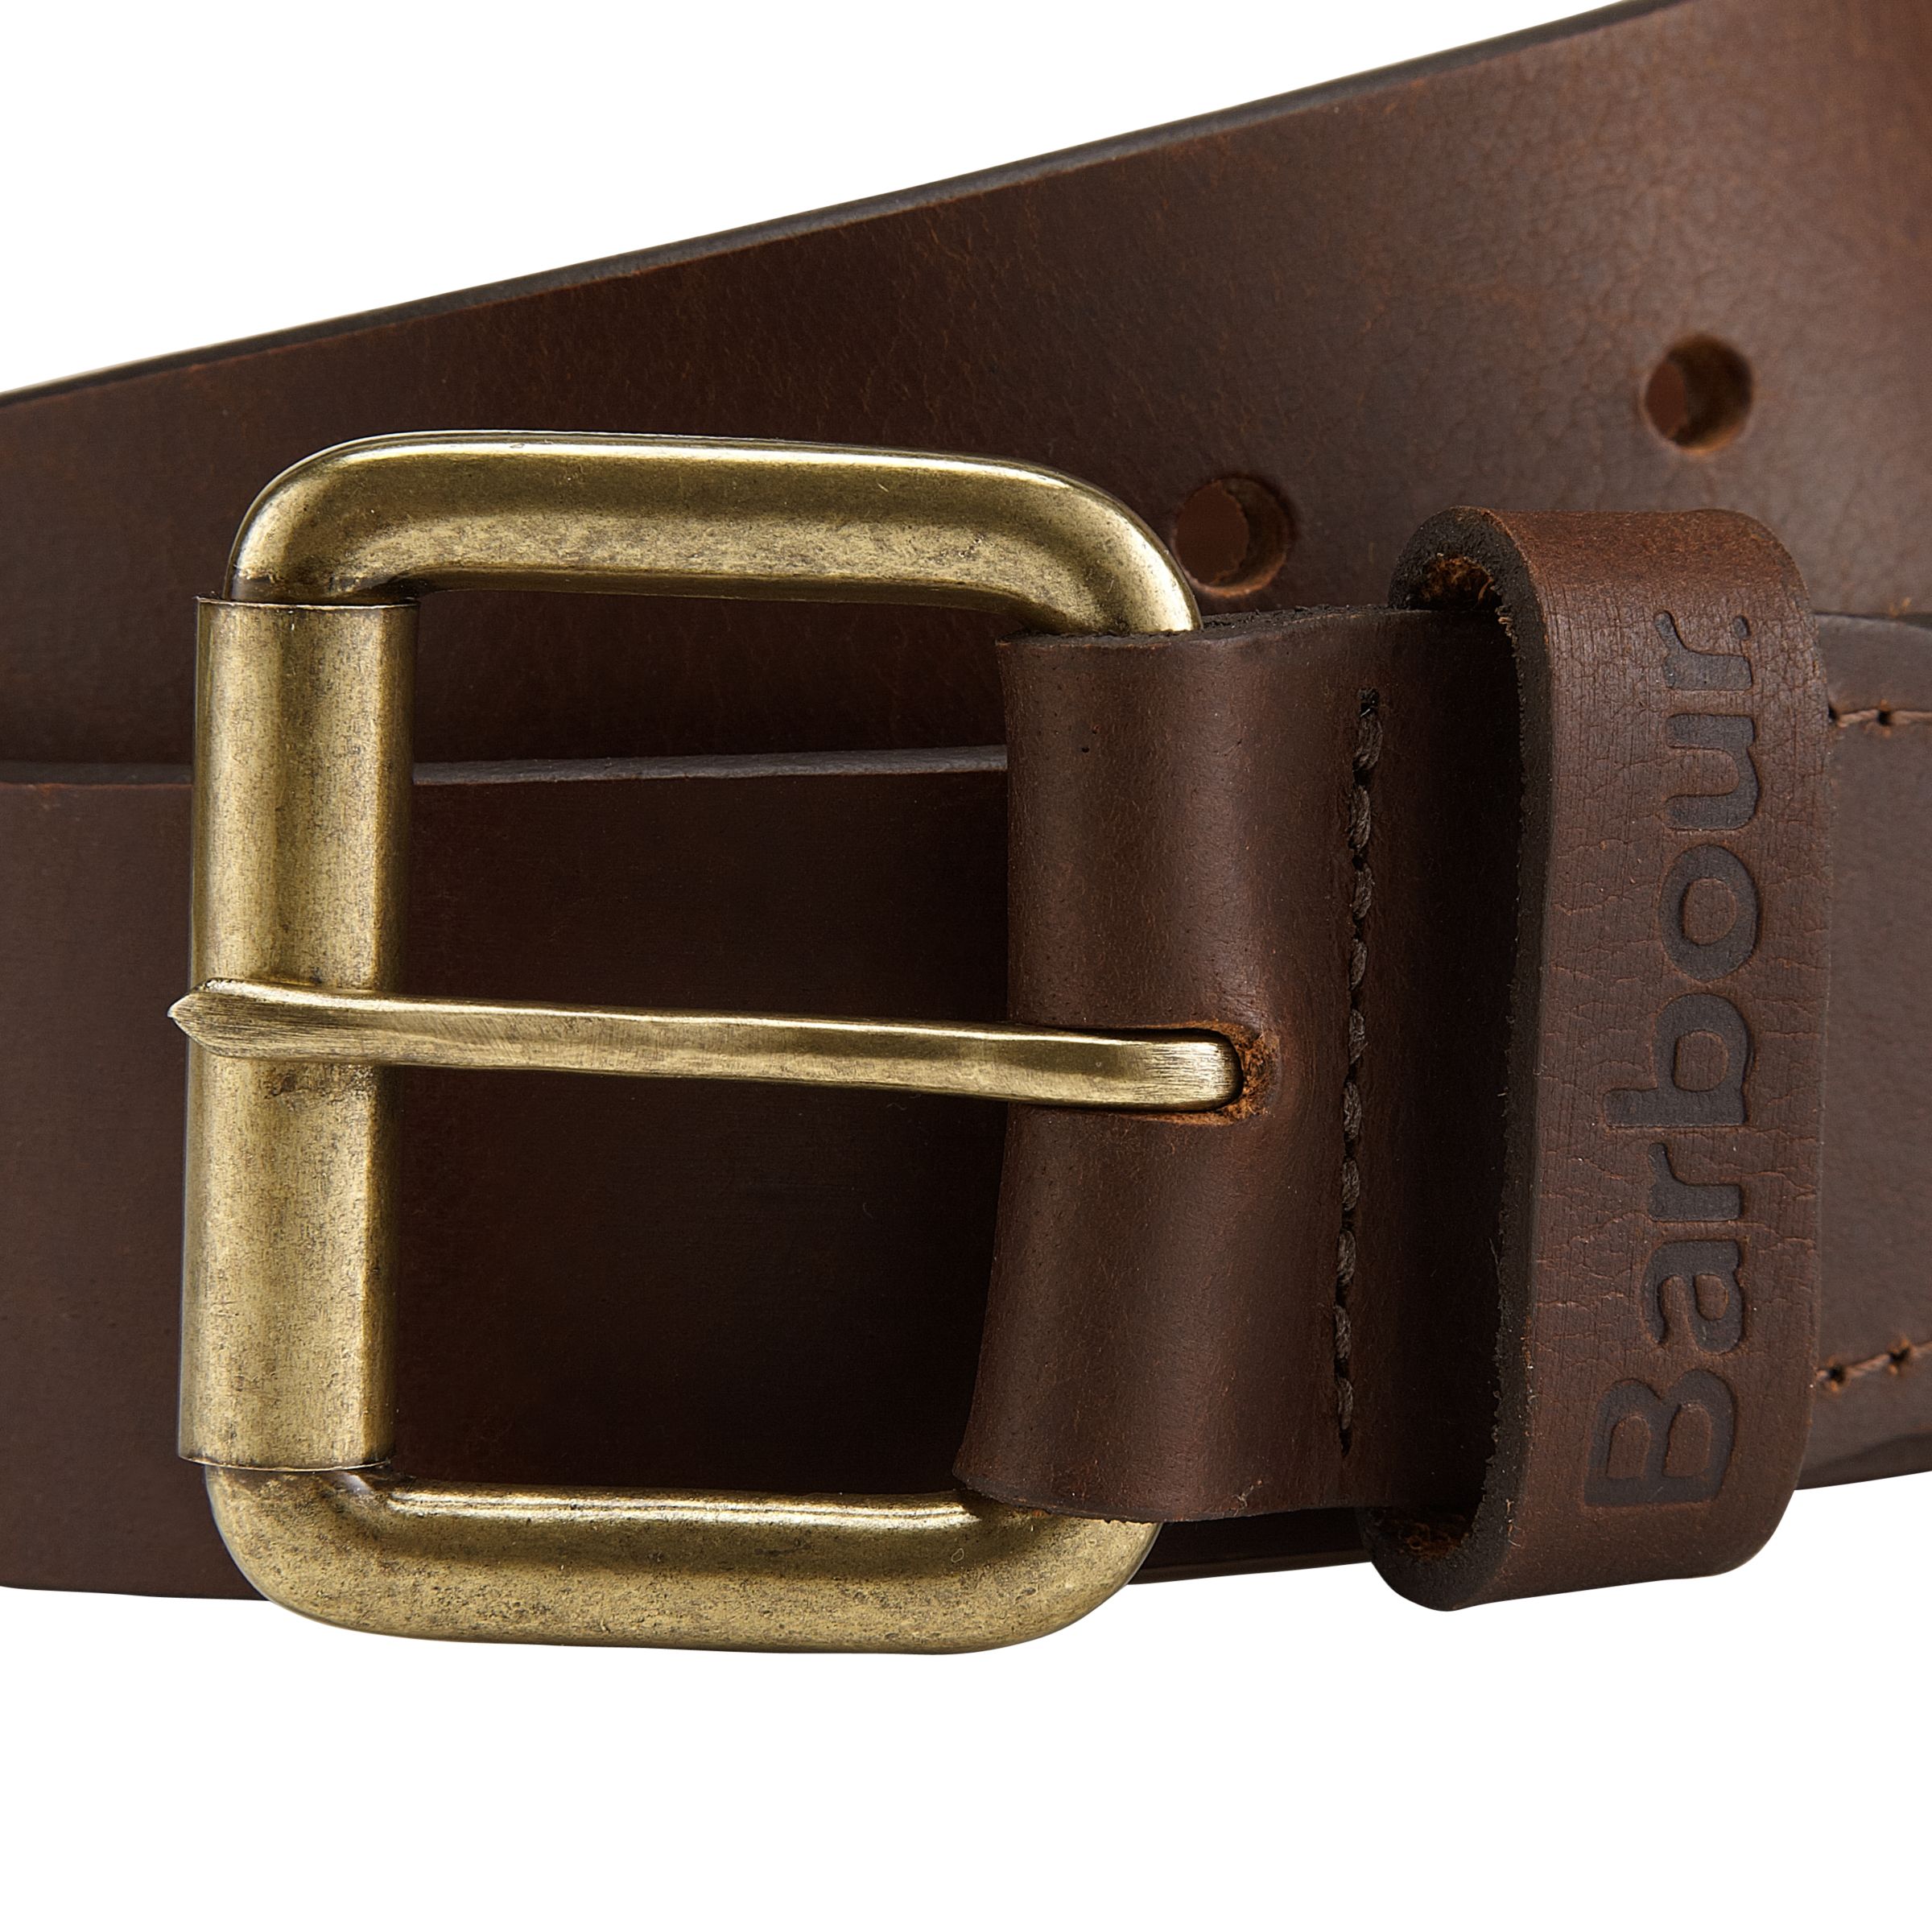 barbour brown leather belt